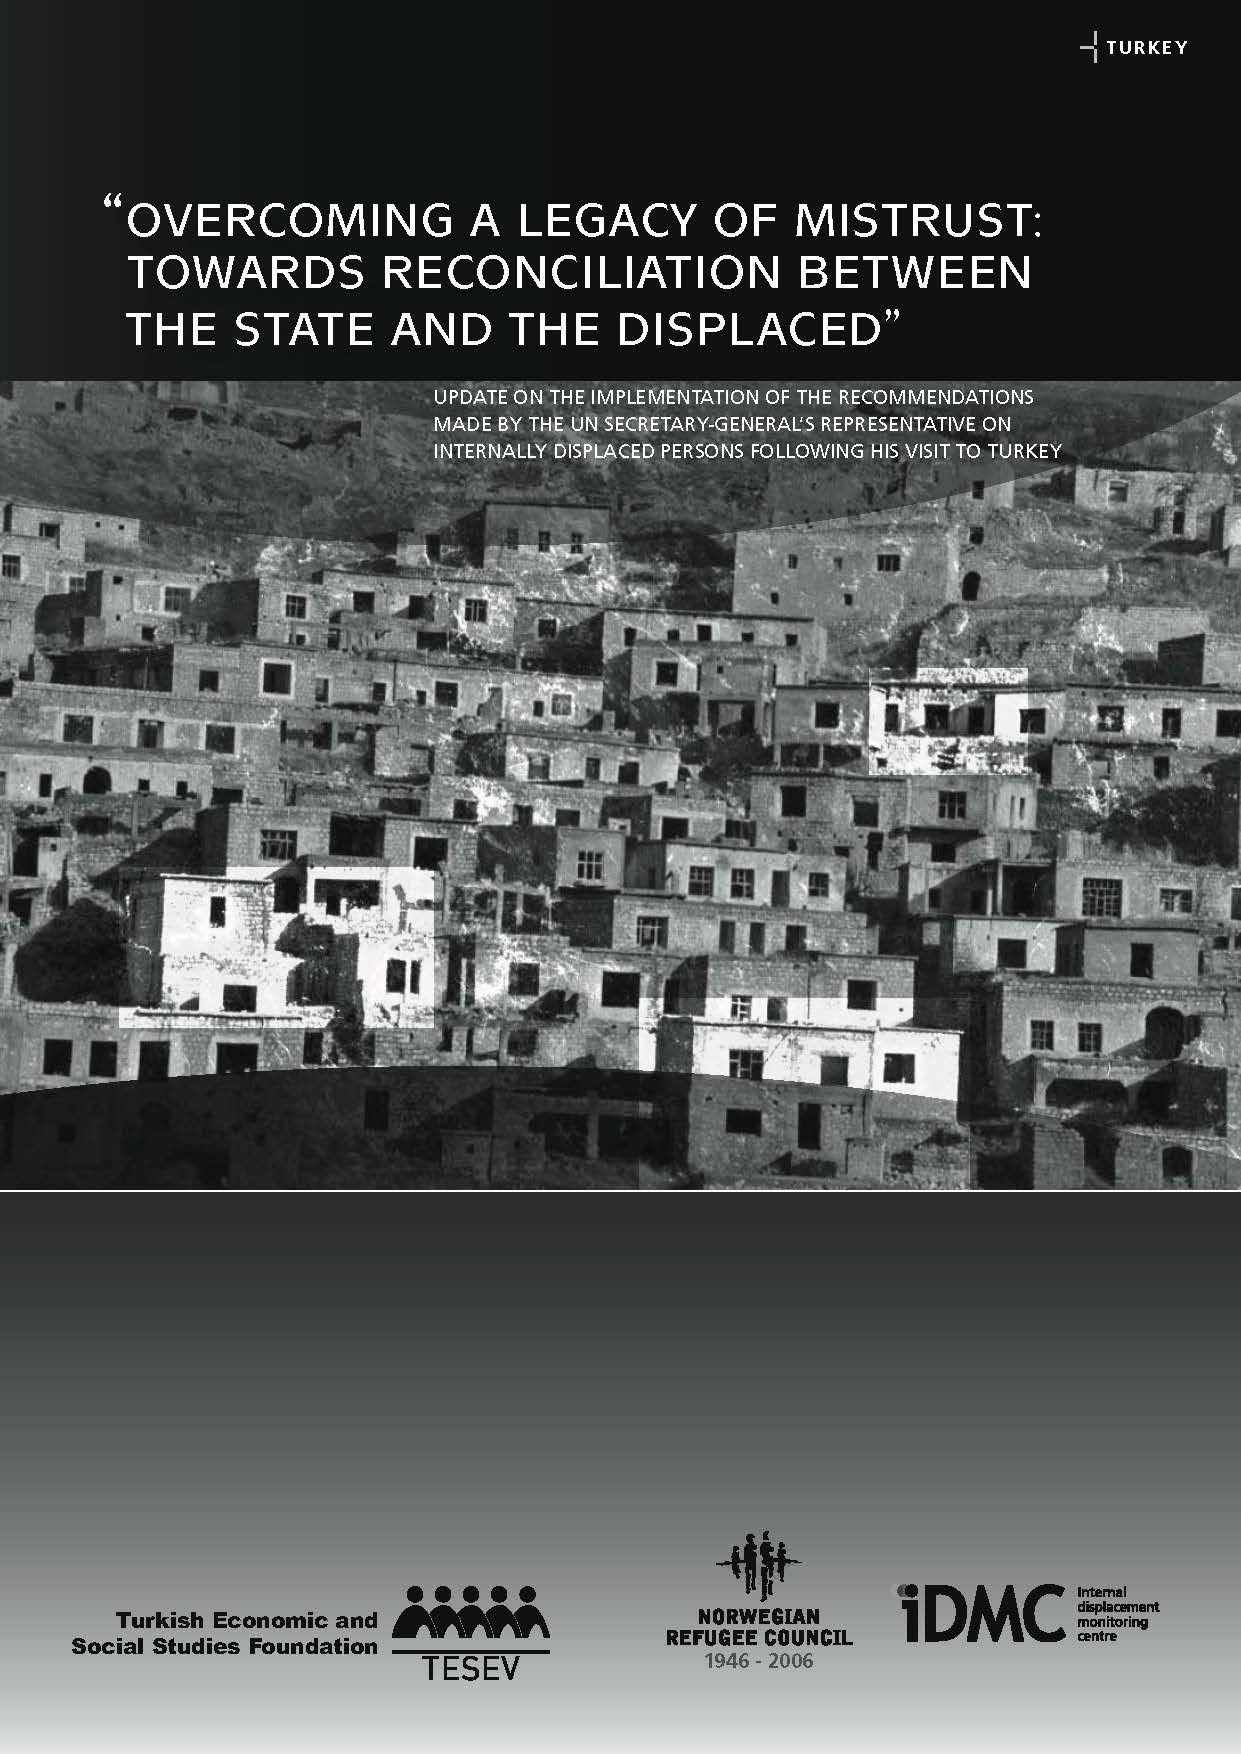 “Overcoming a Legacy of Mistrust: Towards Reconciliation between the State and the Displaced”